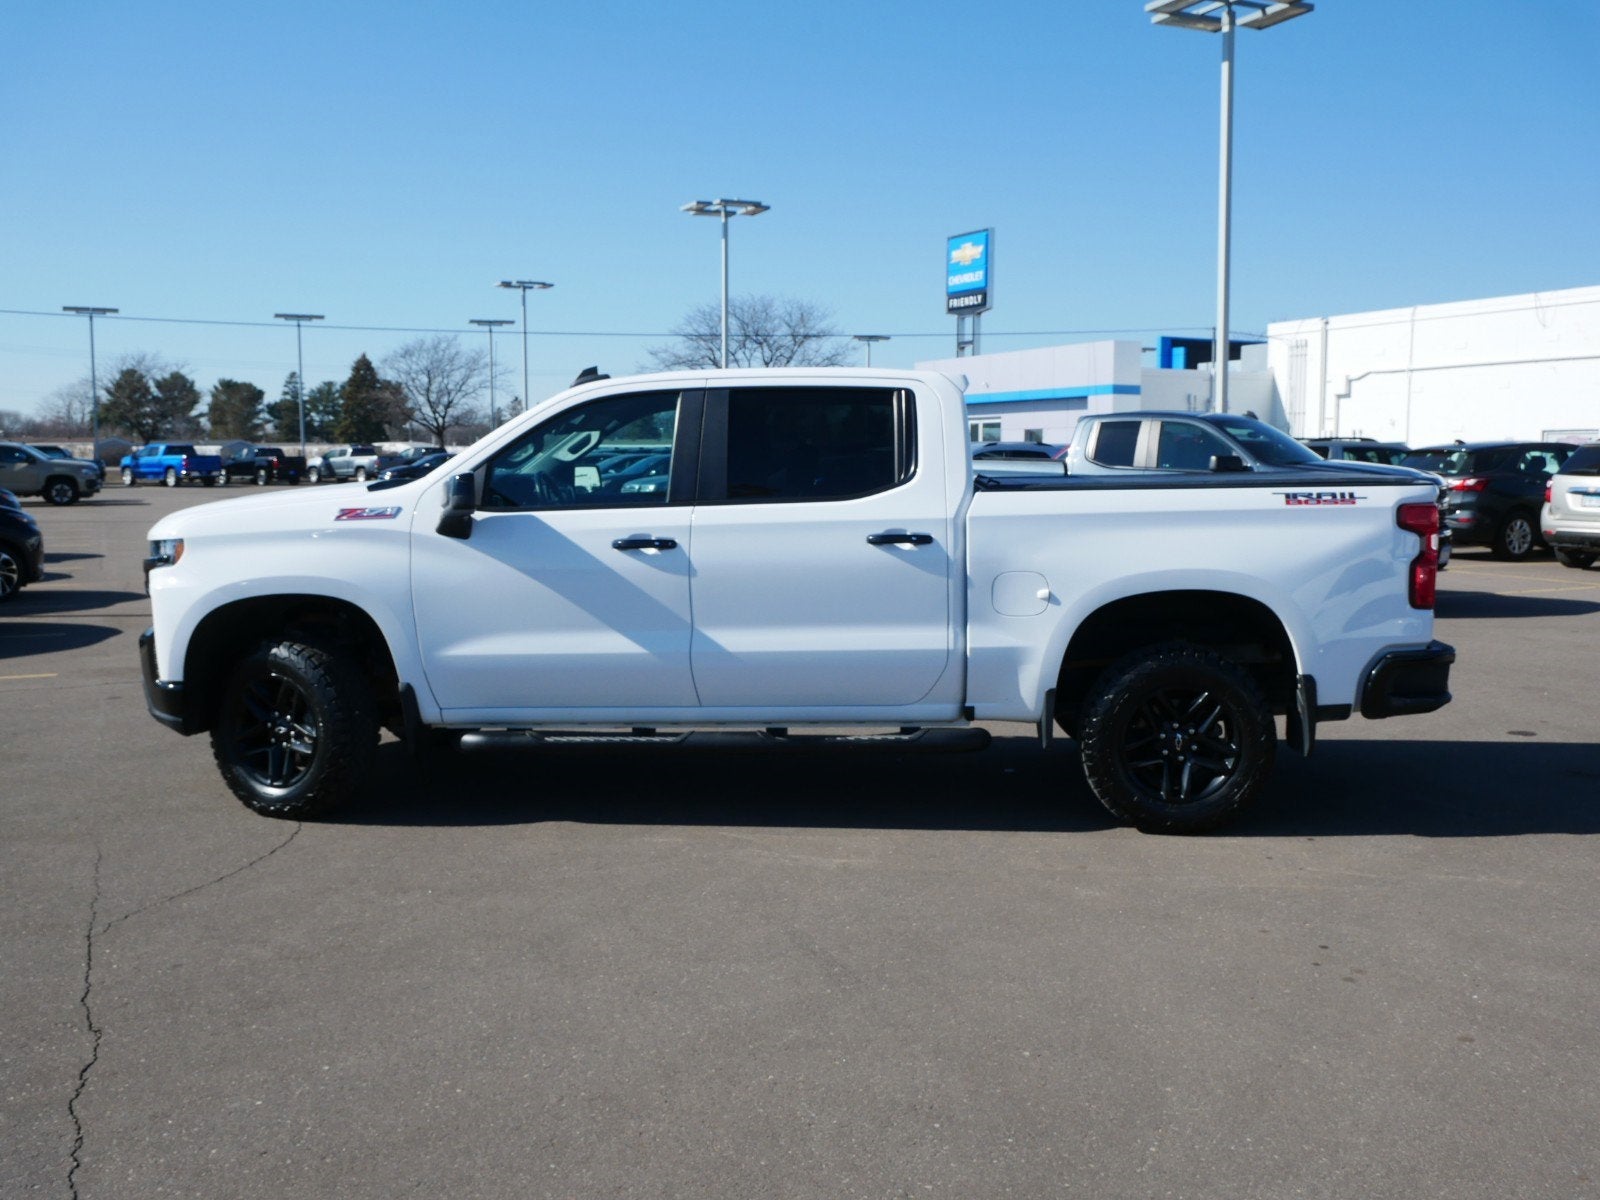 Used 2019 Chevrolet Silverado 1500 LT Trail Boss with VIN 3GCPYFED1KG150185 for sale in Fridley, Minnesota